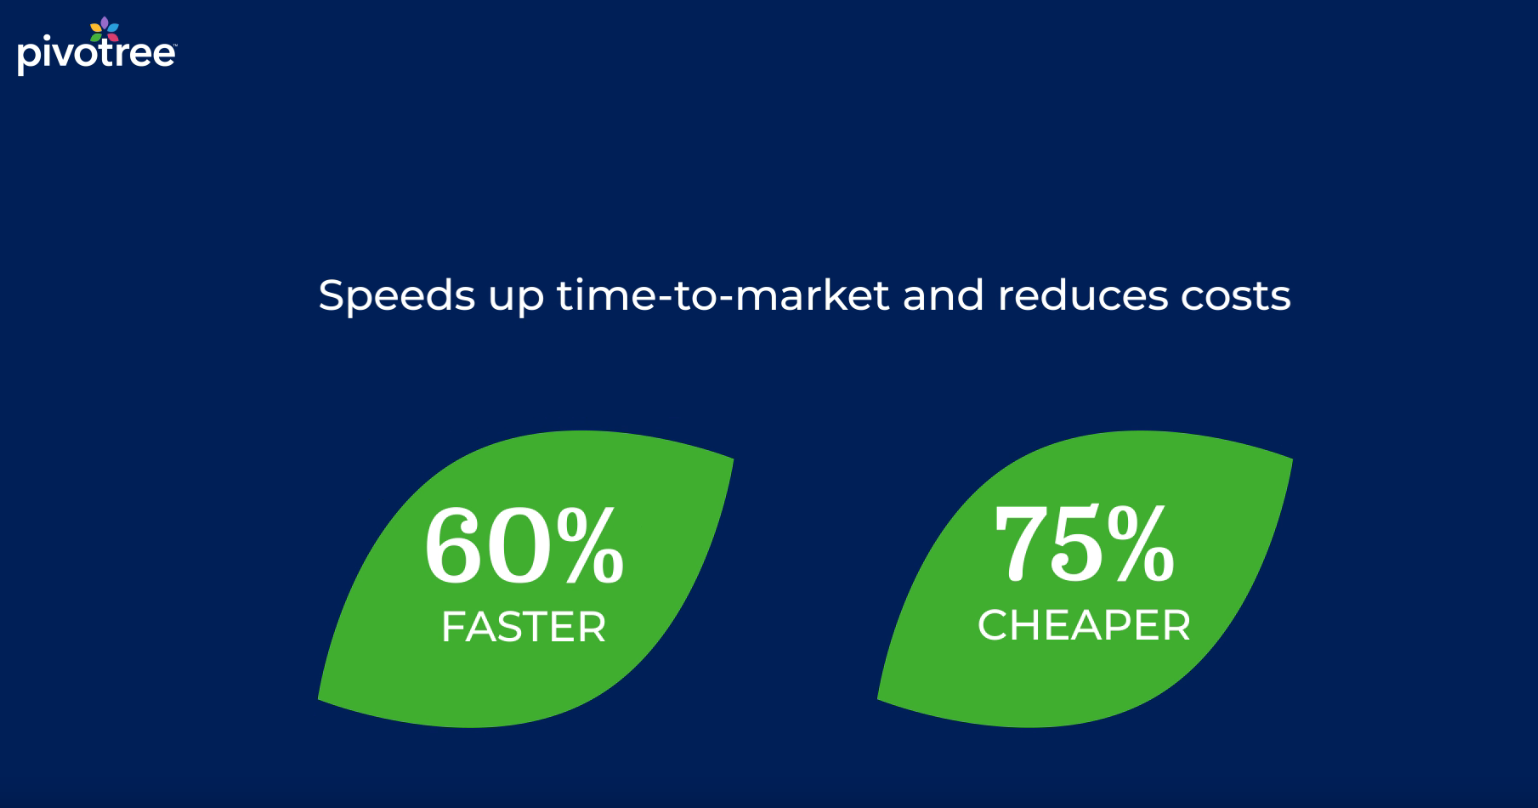 Get Clean, Channel-ready Product Data for the Automotive Aftermarket and Start Selling Online Faster.